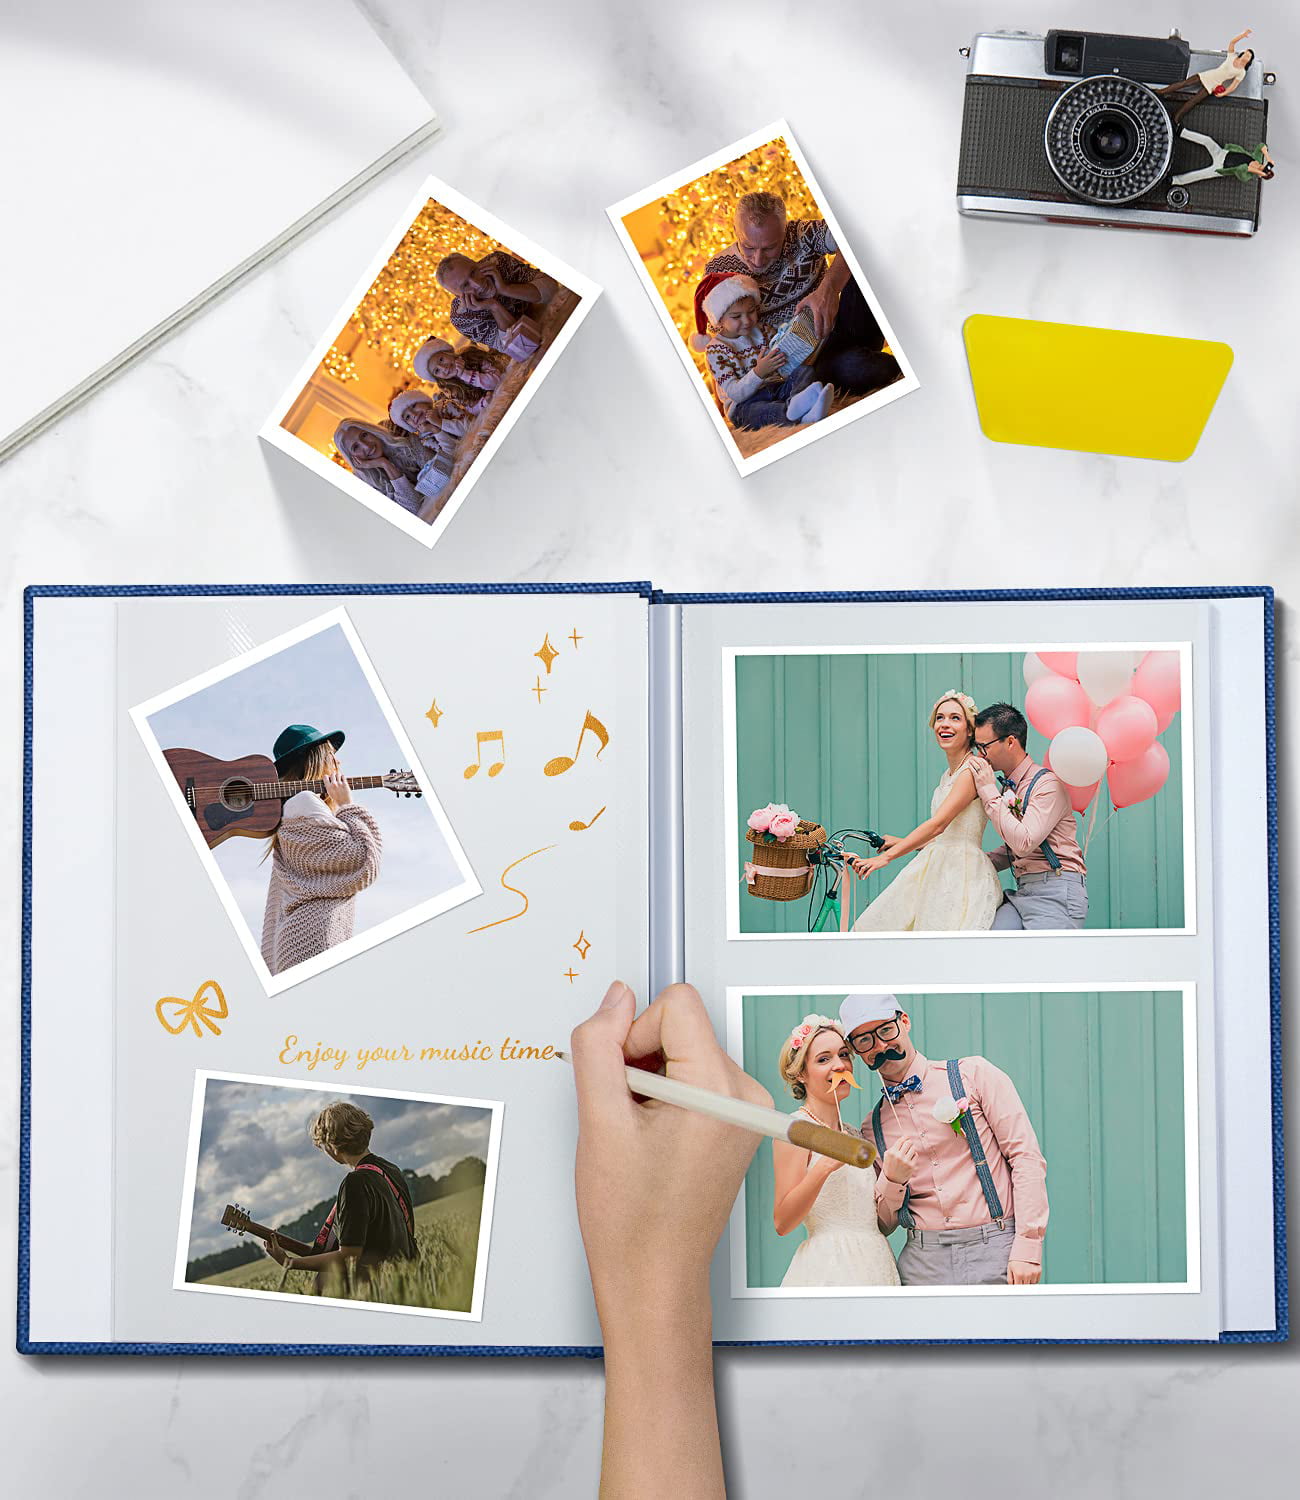 60 Pages Large Photo Album Self Adhesive 46 57 810 inch Pictures DIY  Scrapbook Magnetic Album for Family Wedding Christmas Gifts with Metal Pen  and Plastic Board 